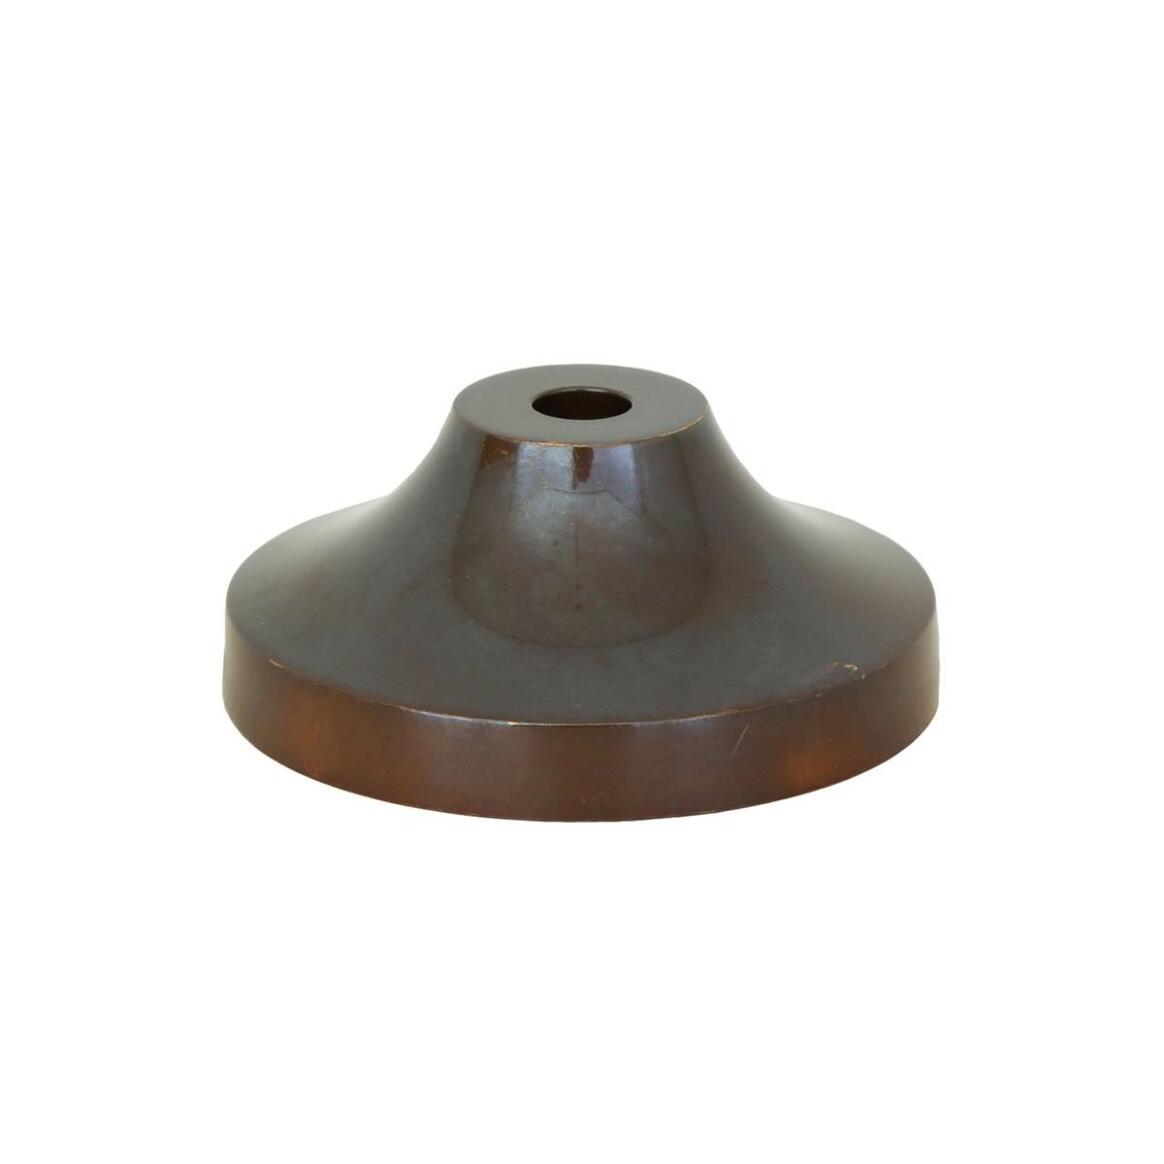 3.15" cast cone wall bracket main product image